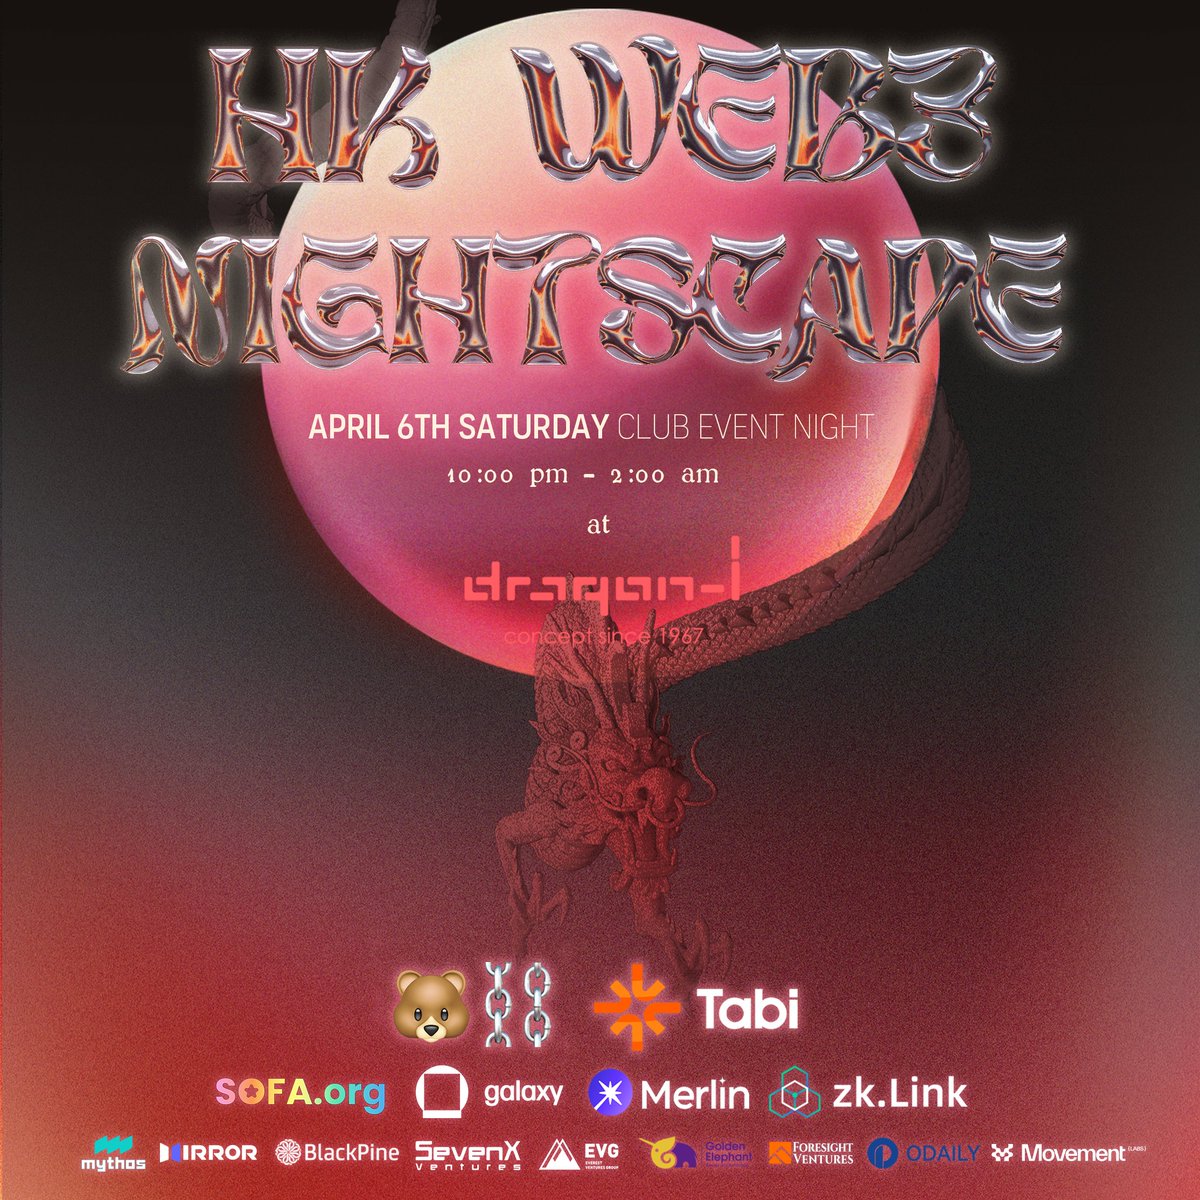 HK WEB3 NIGHTSCAPE 🪩 BM Ooga Booga gang! 🐻🤘🏻@Tabichain is thrilled to host an incredible clubbing event with @berachain during Hong Kong Blockchain week on April 6th evening 🌆✨ Sign up here: lu.ma/izd6xw99 We have the leading VC frens from @GalaxyDigital,…